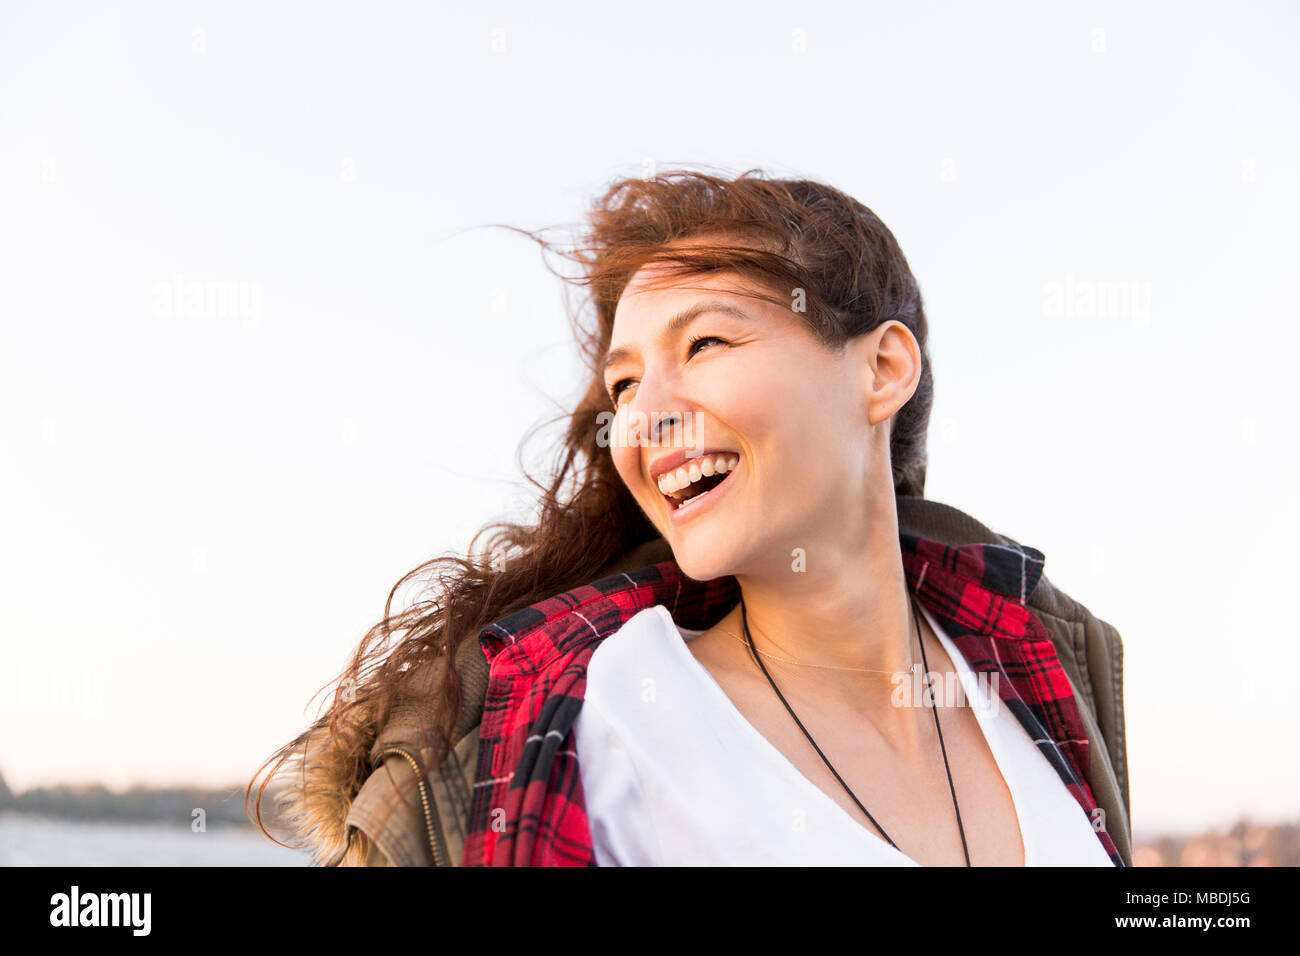 Smiling, enthusiastic woman looking over shoulder Stock Photo